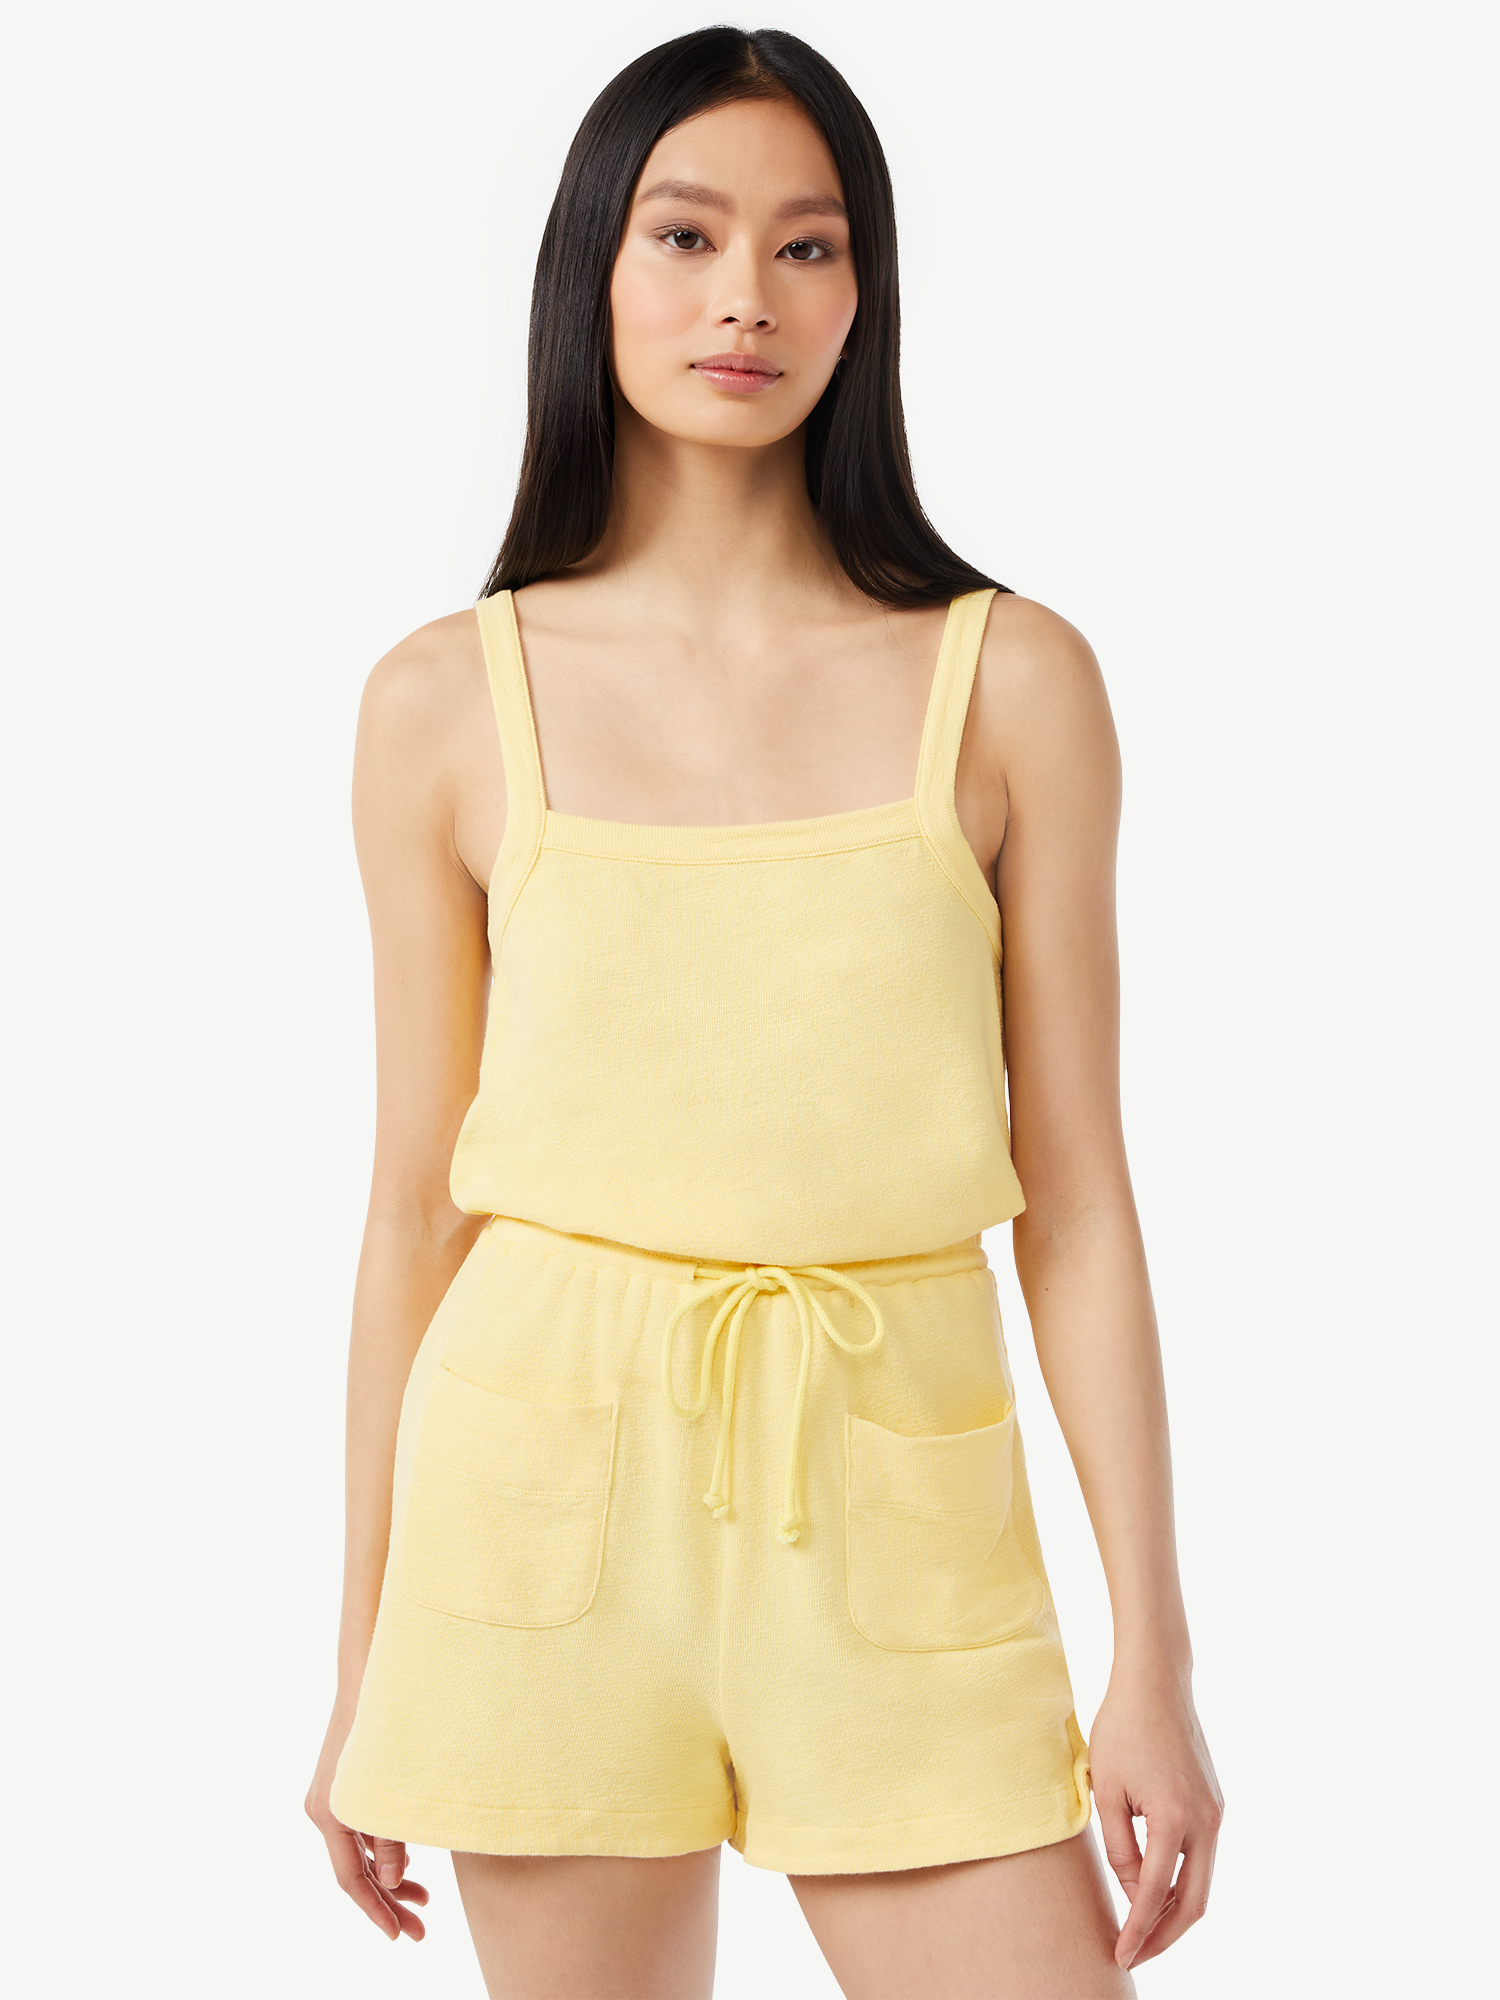 Free Assembly Women's Sleeveless Cotton Romper - image 1 of 5